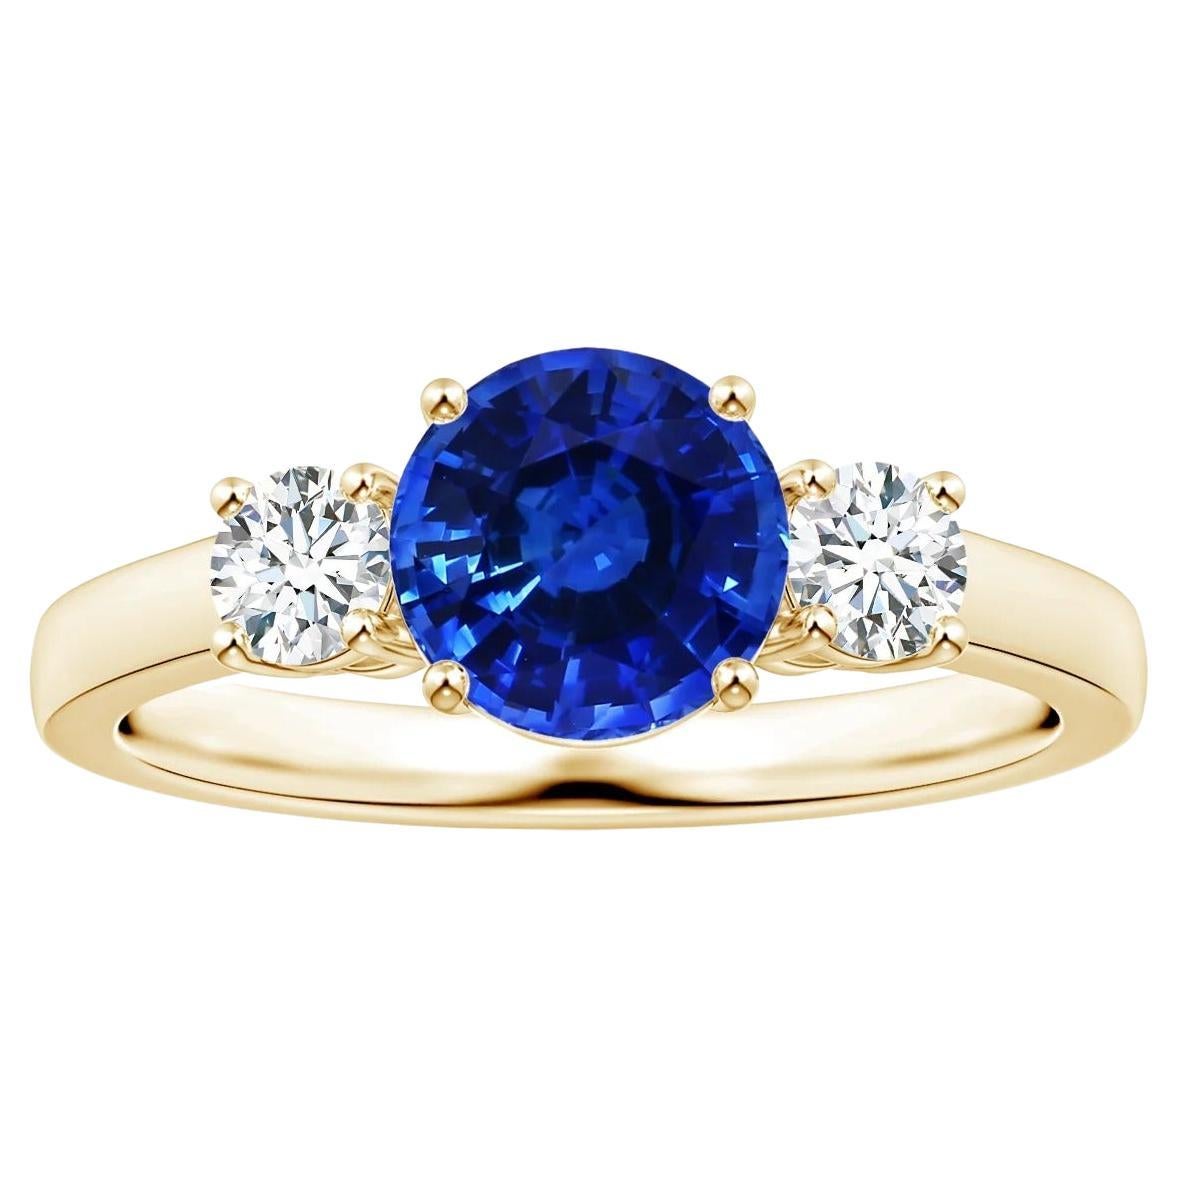 For Sale:  Angara Three Stone Gia Certified Blue Sapphire Ring in Yellow Gold with Diamonds